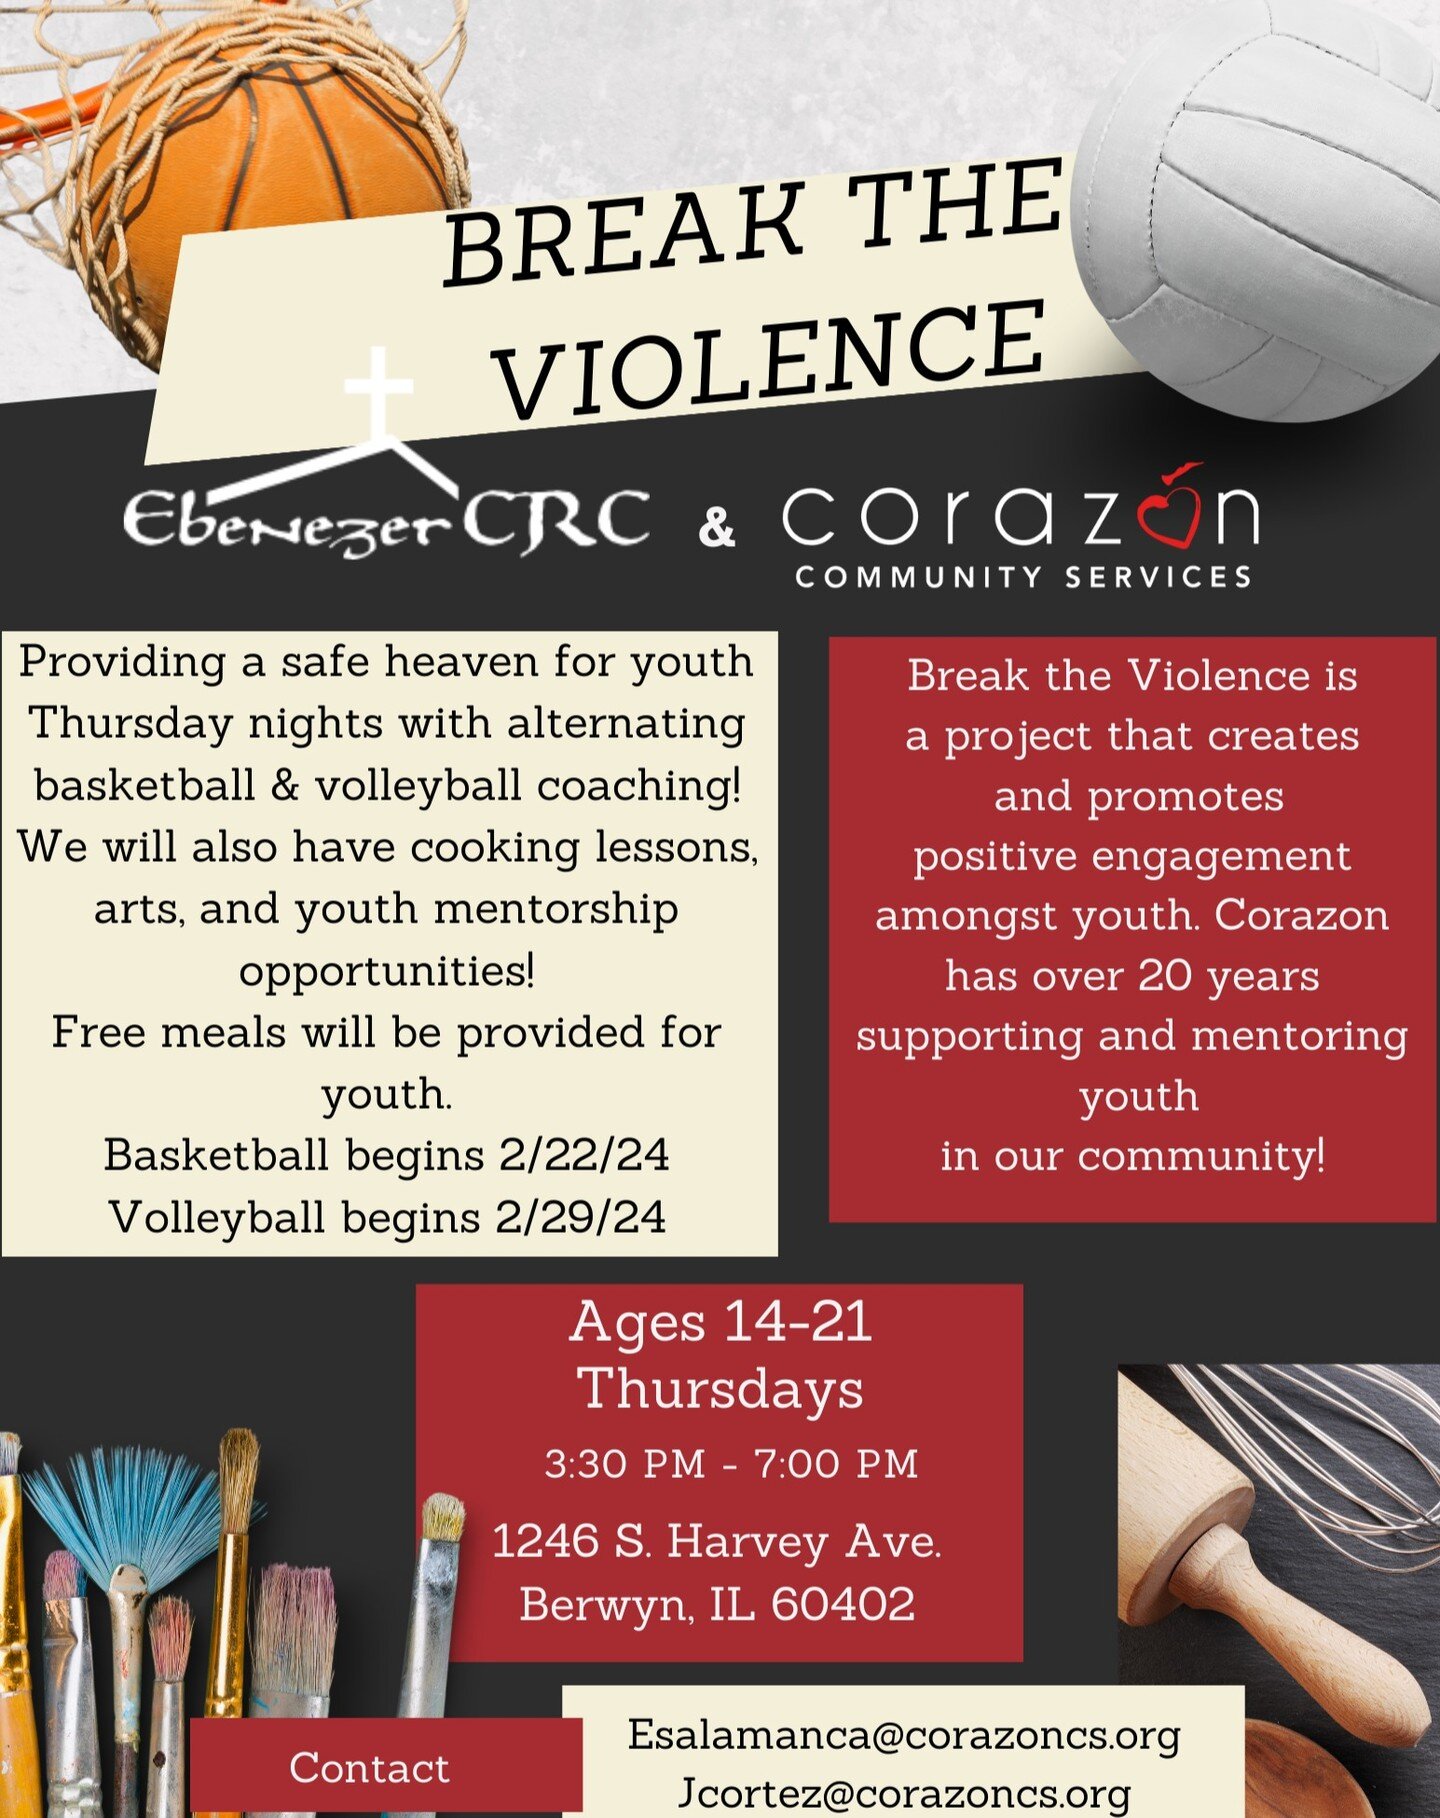 Happy Friday! We hope you'll join us this Thursday as we kick off Break The Violence! 

Stop by for a free meal and a great hang-out spot with your friends, starting 2/22/24. See you then!